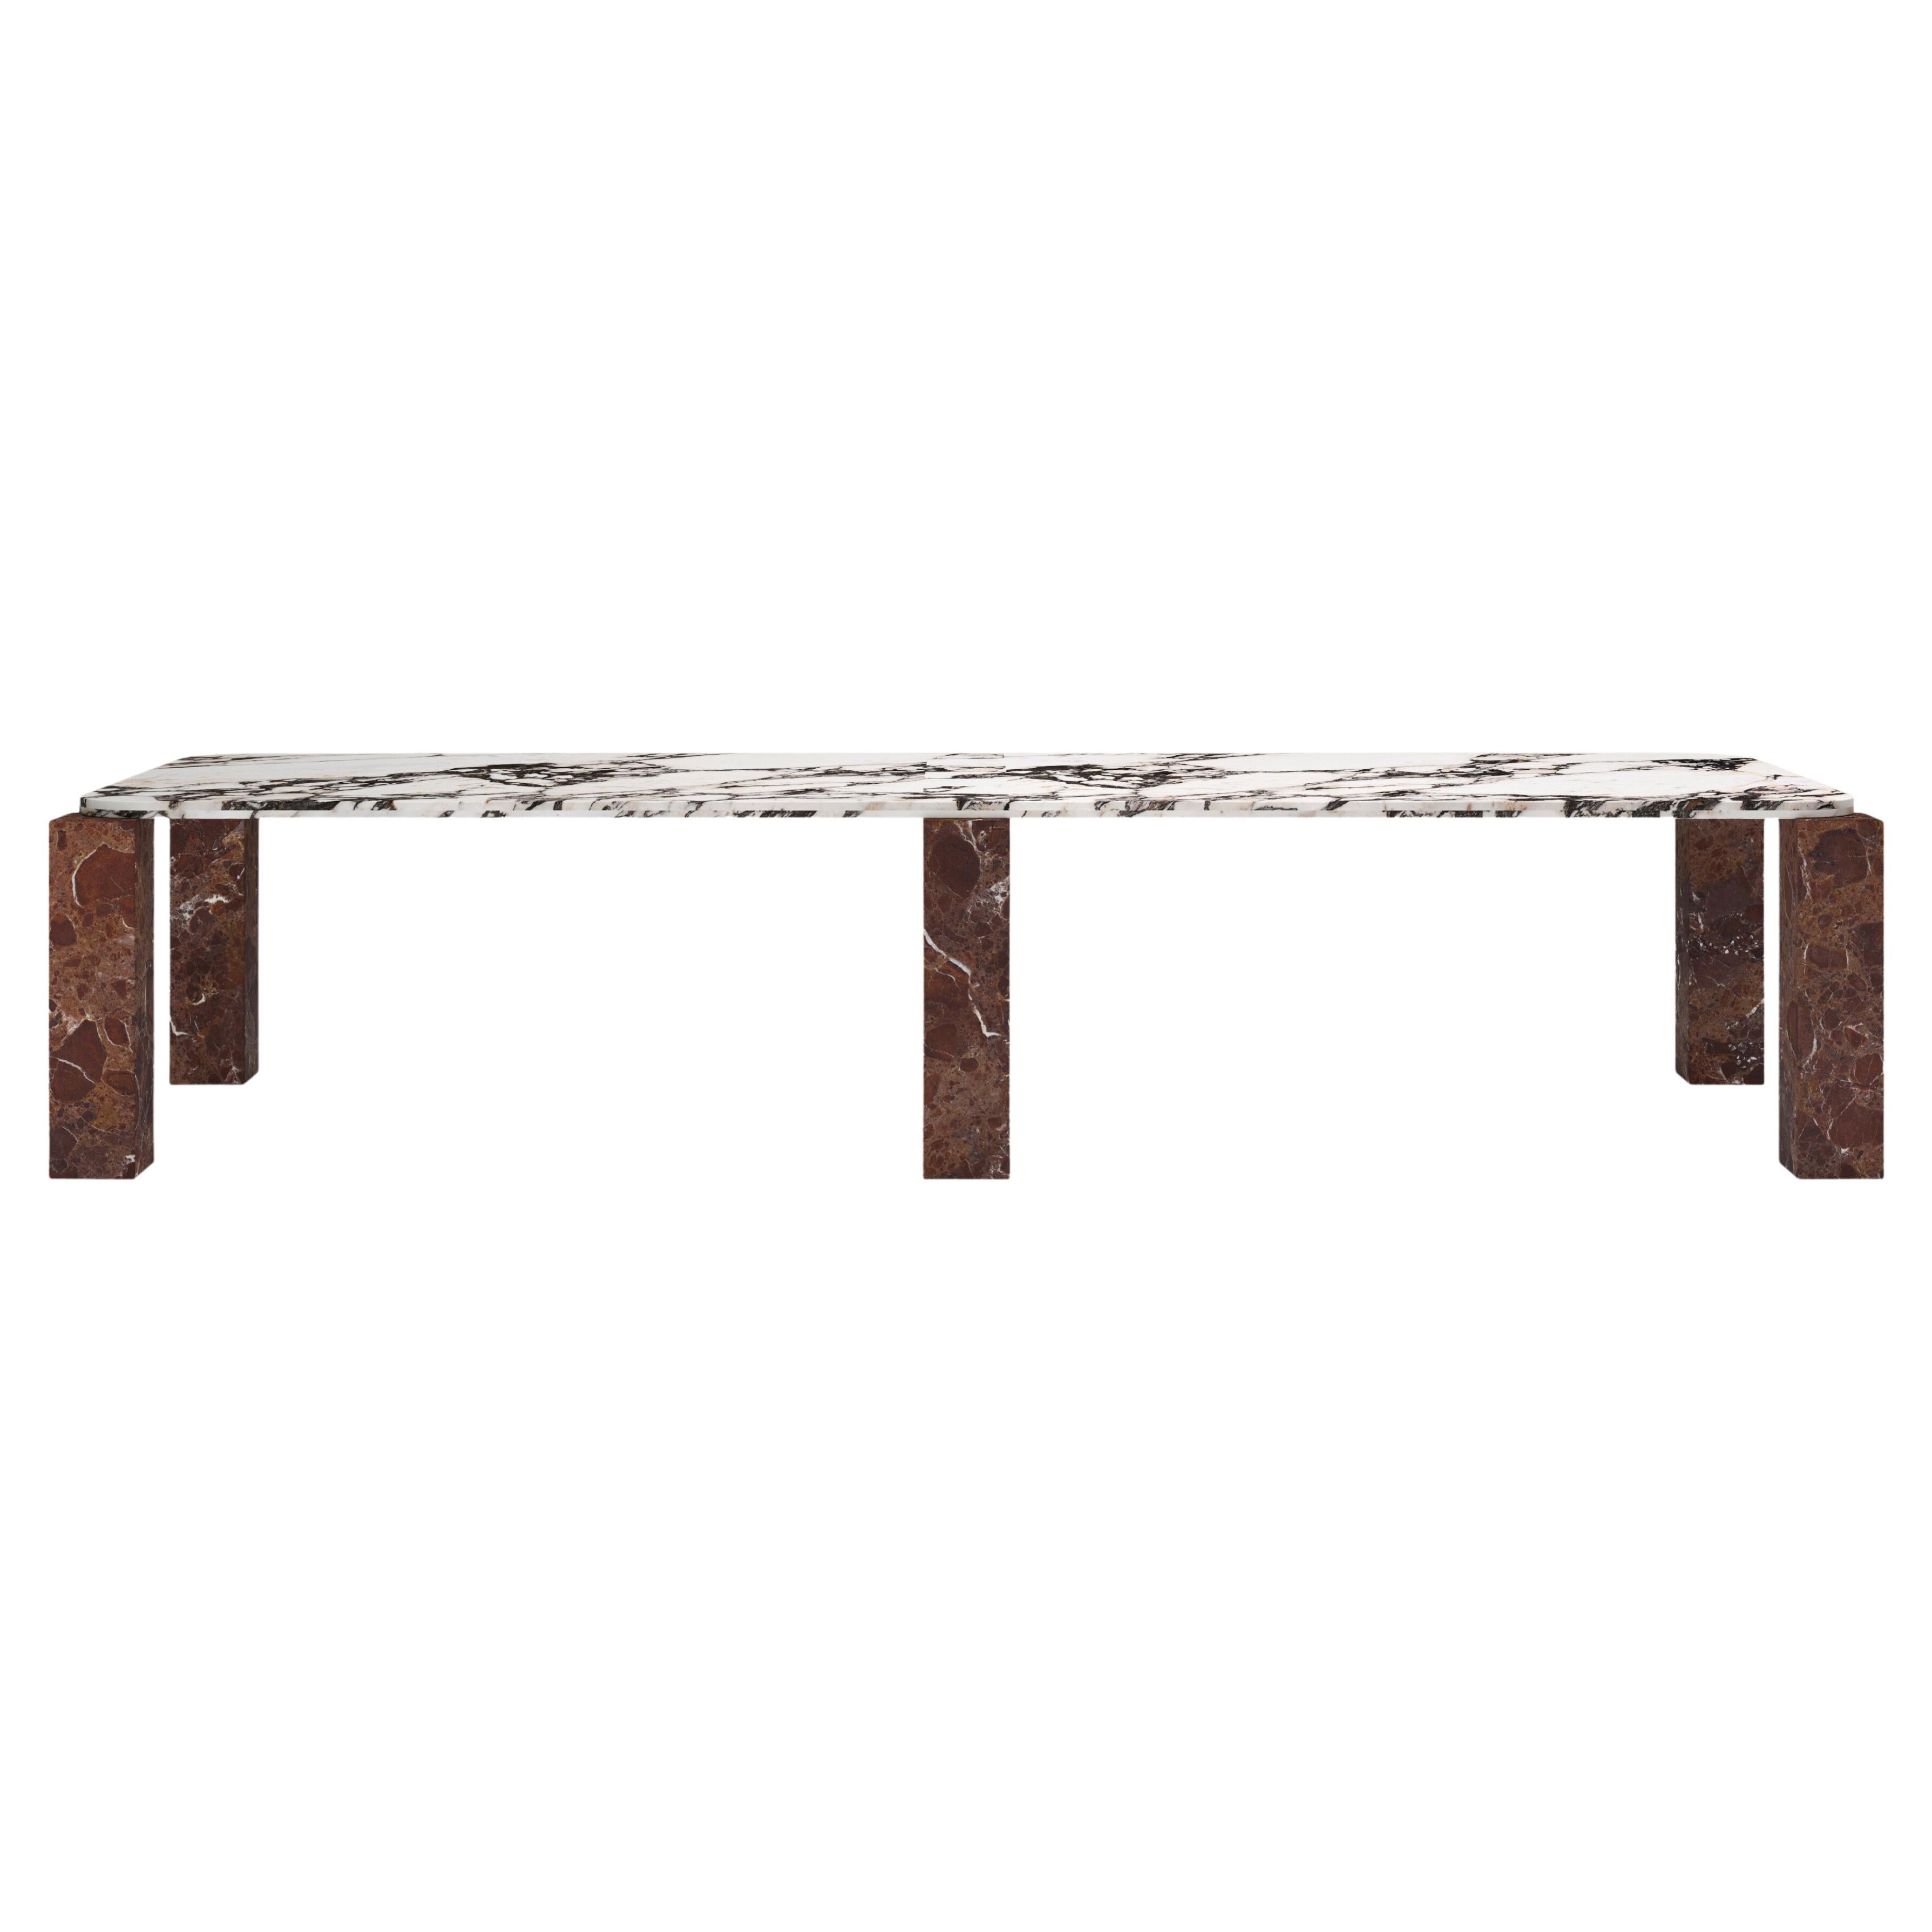 FORM(LA) Cubo Rectangle Dining Table 146”L x 50”W x 30”H Viola & Rosso Marble For Sale